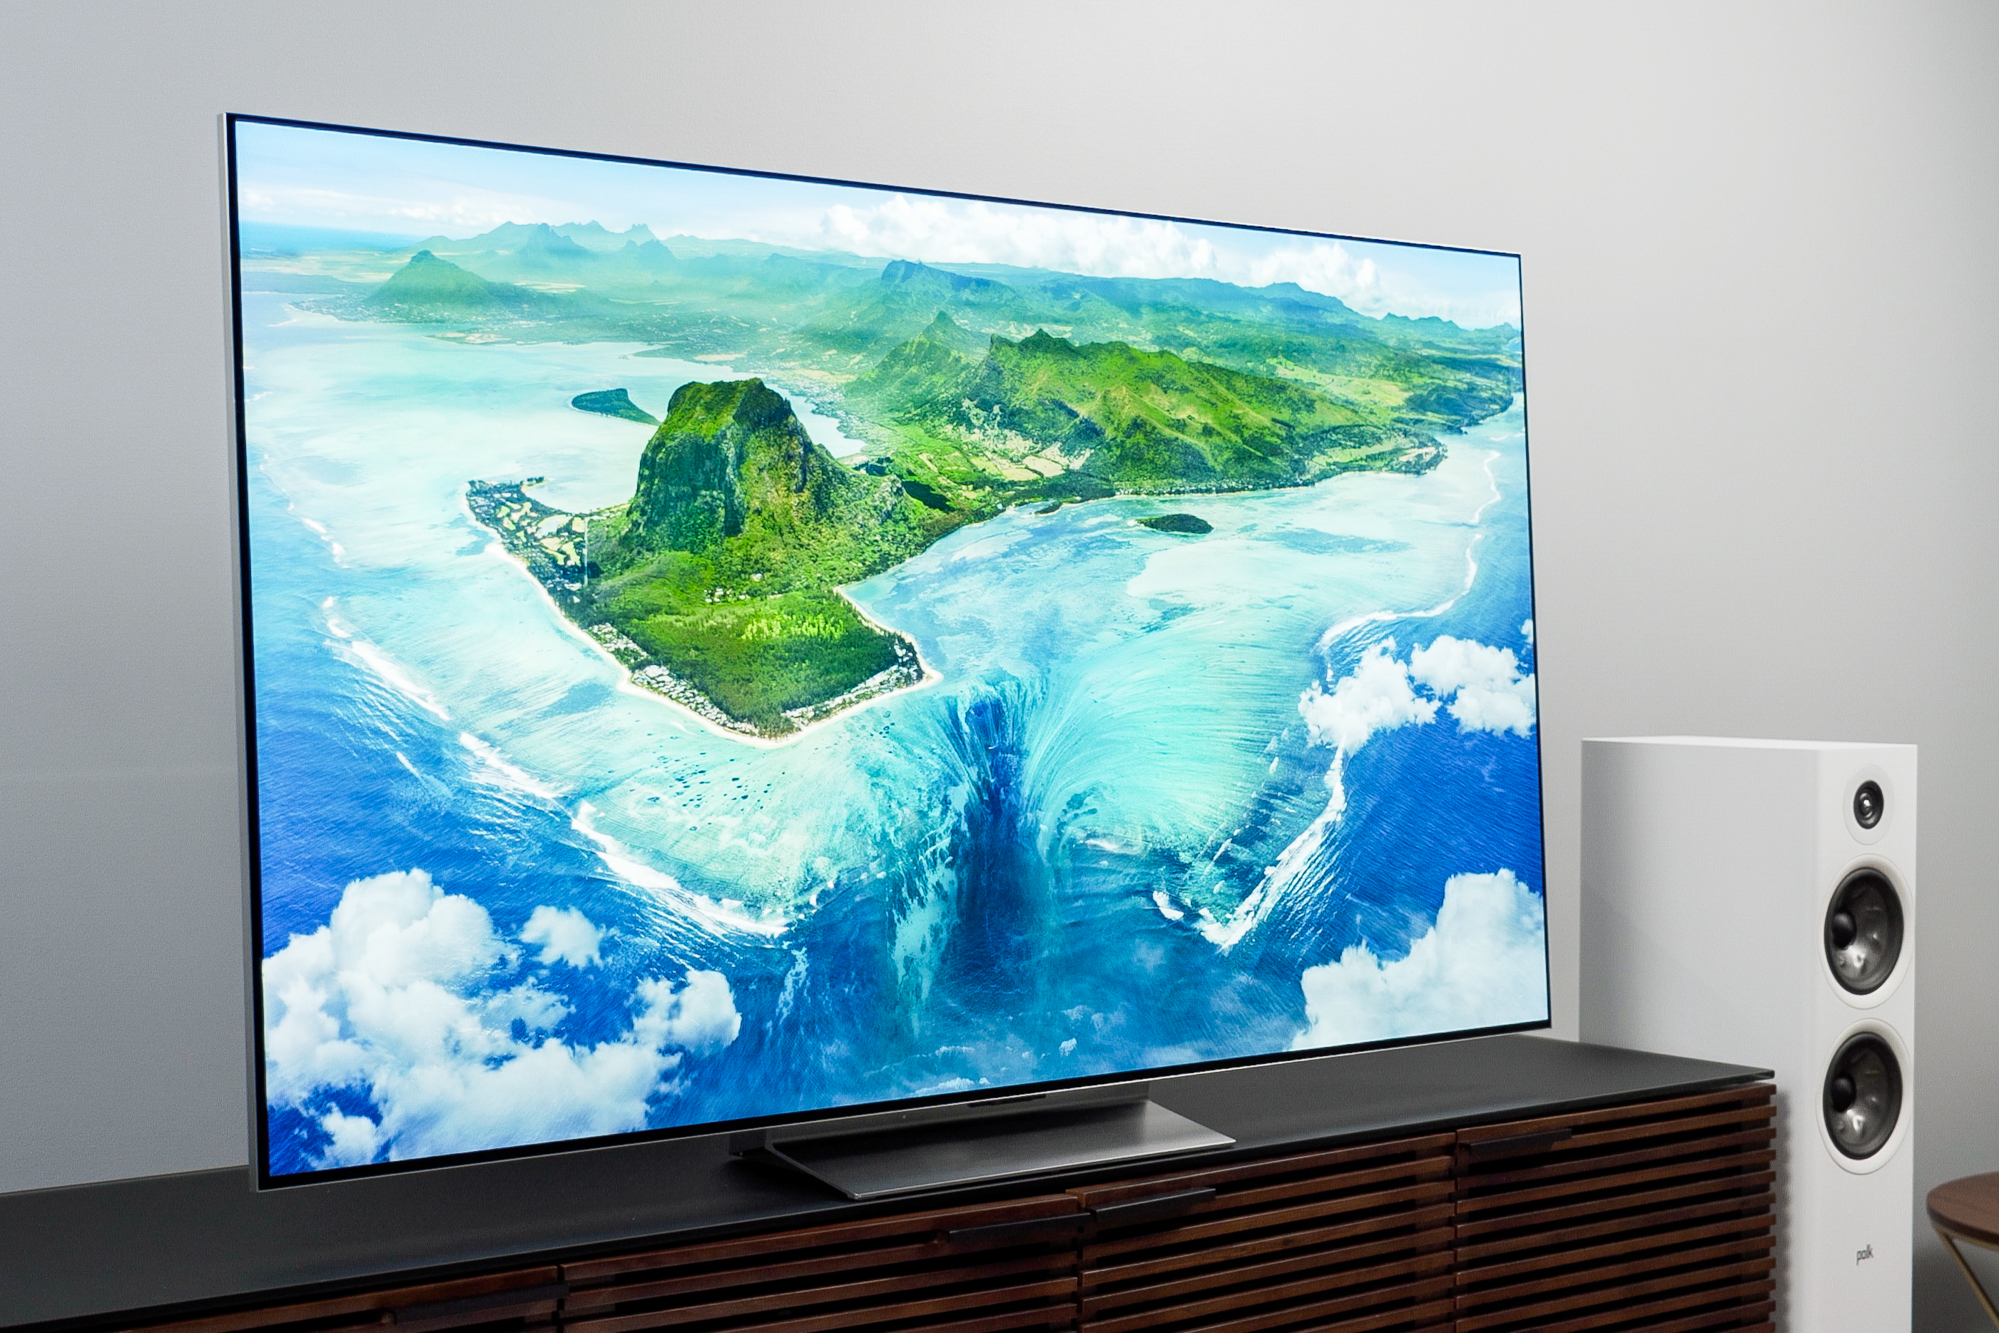 LG's 48-inch C3 OLED has just dropped below £1000 at Smart Home Sounds